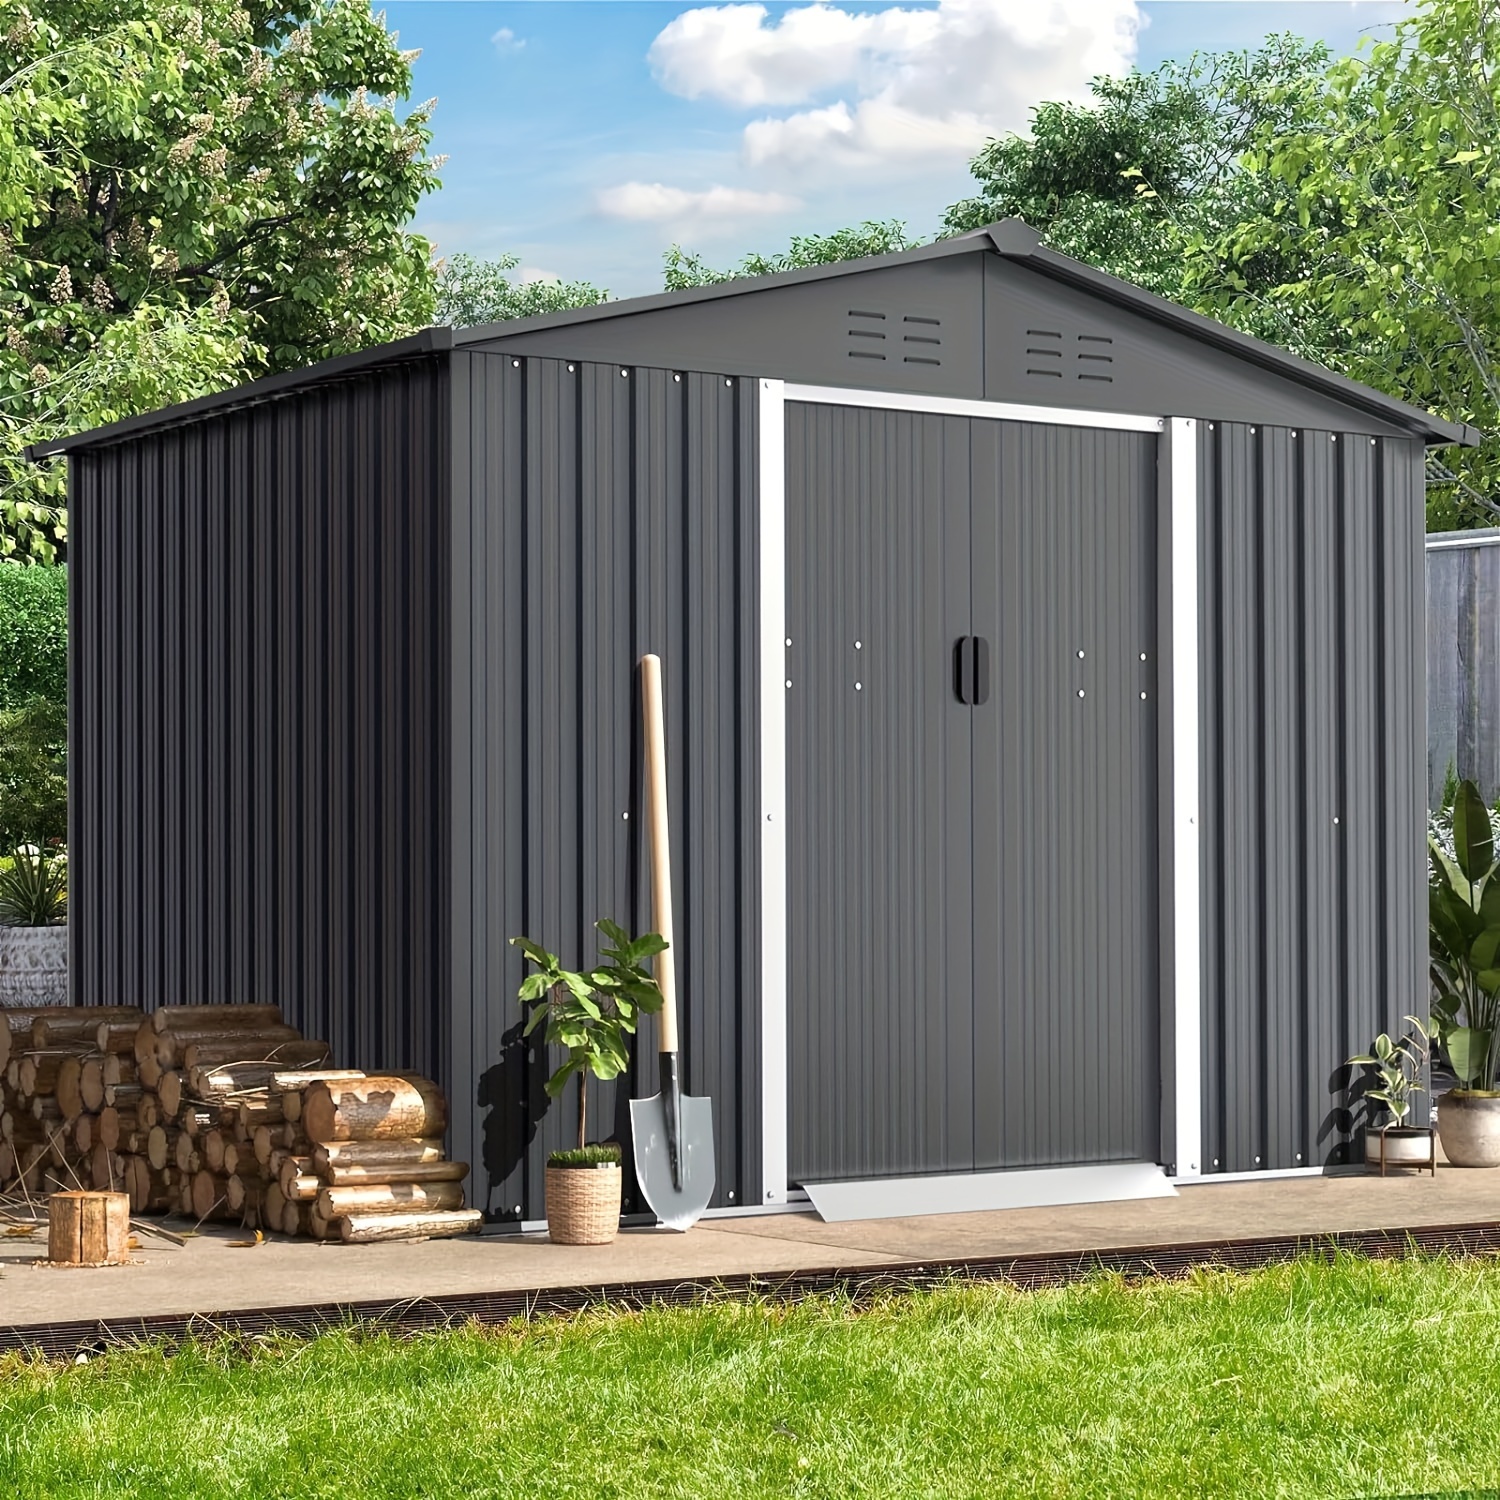 

8x6 Ft Outdoor Garden Storage Shed Patio Storage Tool Shed With Sliding Door For Lawn Equipment, Garden, Backyard, Gray